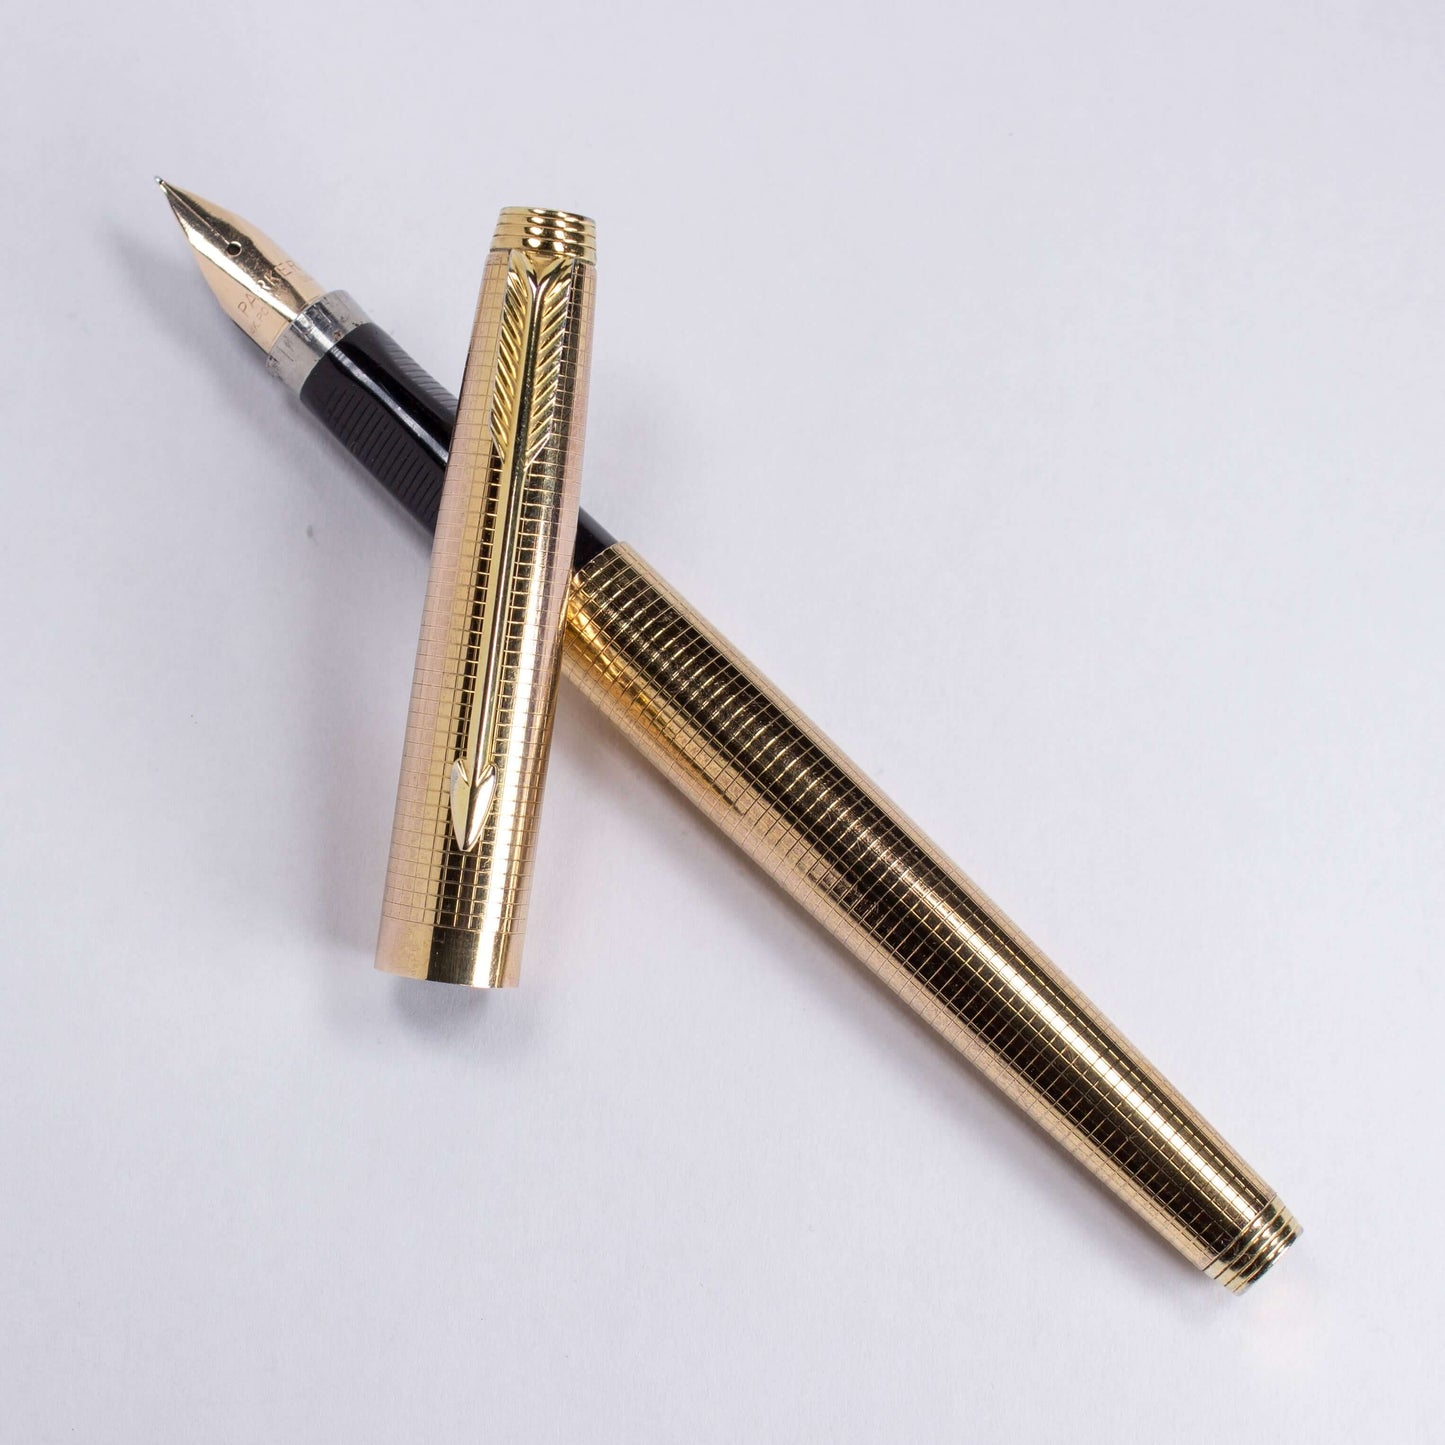 Gold Plated, Parker 75, Fine 14K Nib, C/C. Made in the U.S.A.